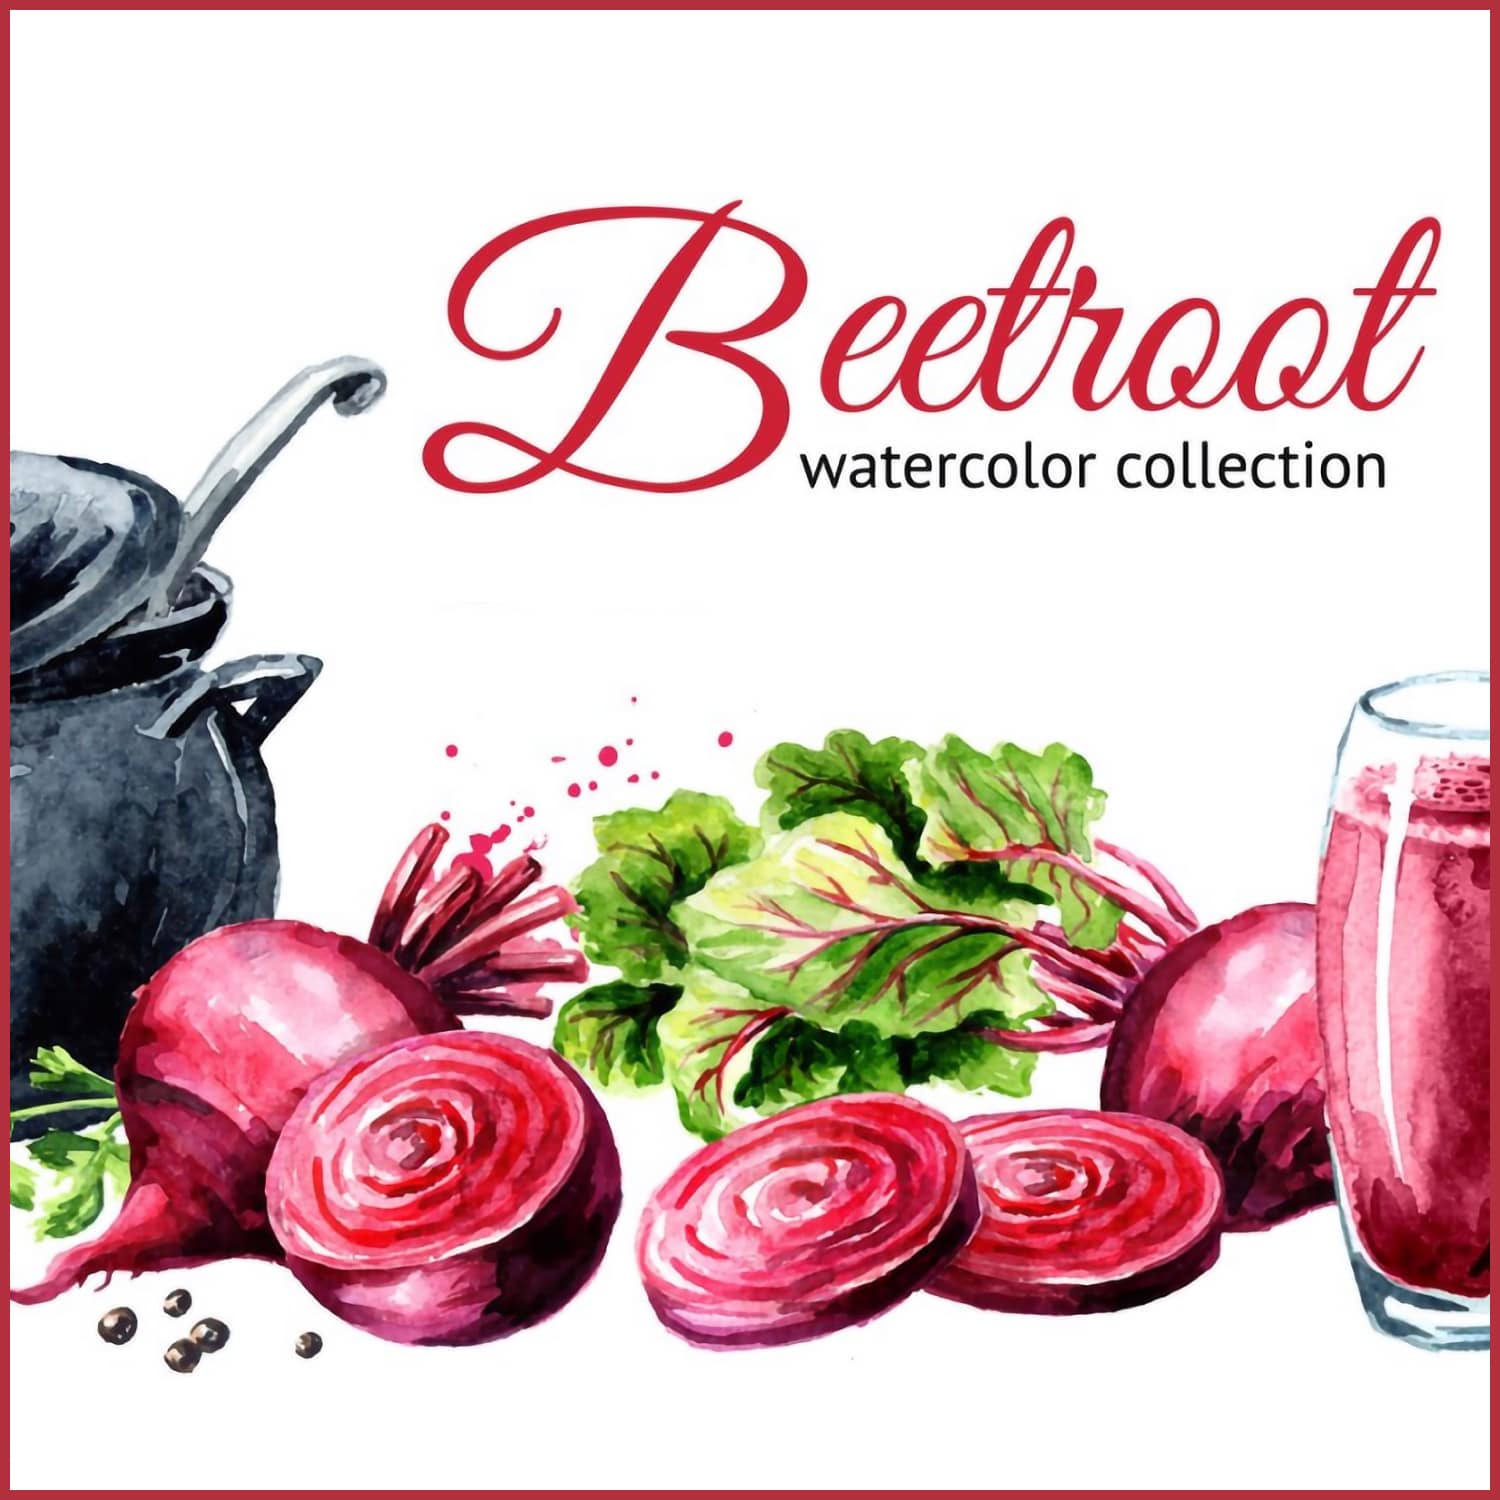 Beet root. Watercolor collection.